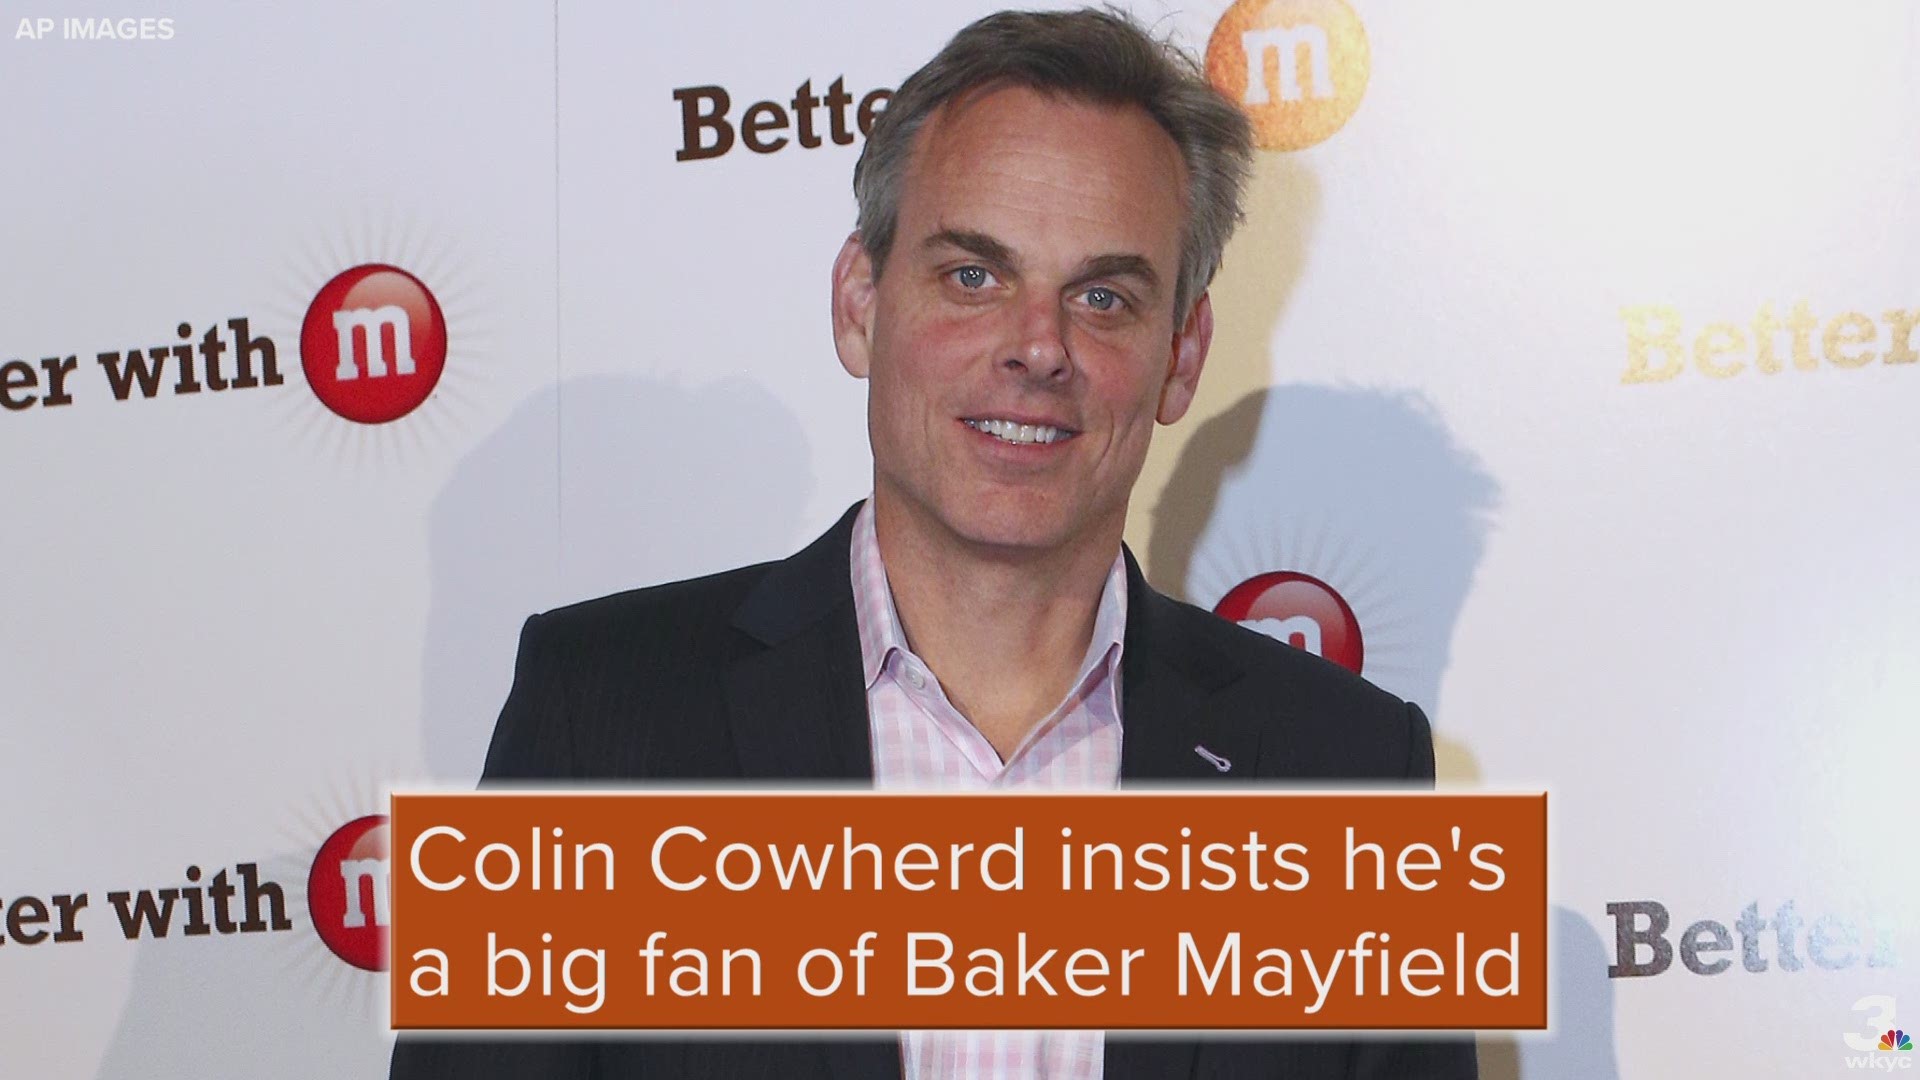 Despite an intense Twitter exchange over the weekend, Fox Sports Radio host Colin Cowherd insisted he's a big fan of Cleveland Browns quarterback Baker Mayfield.